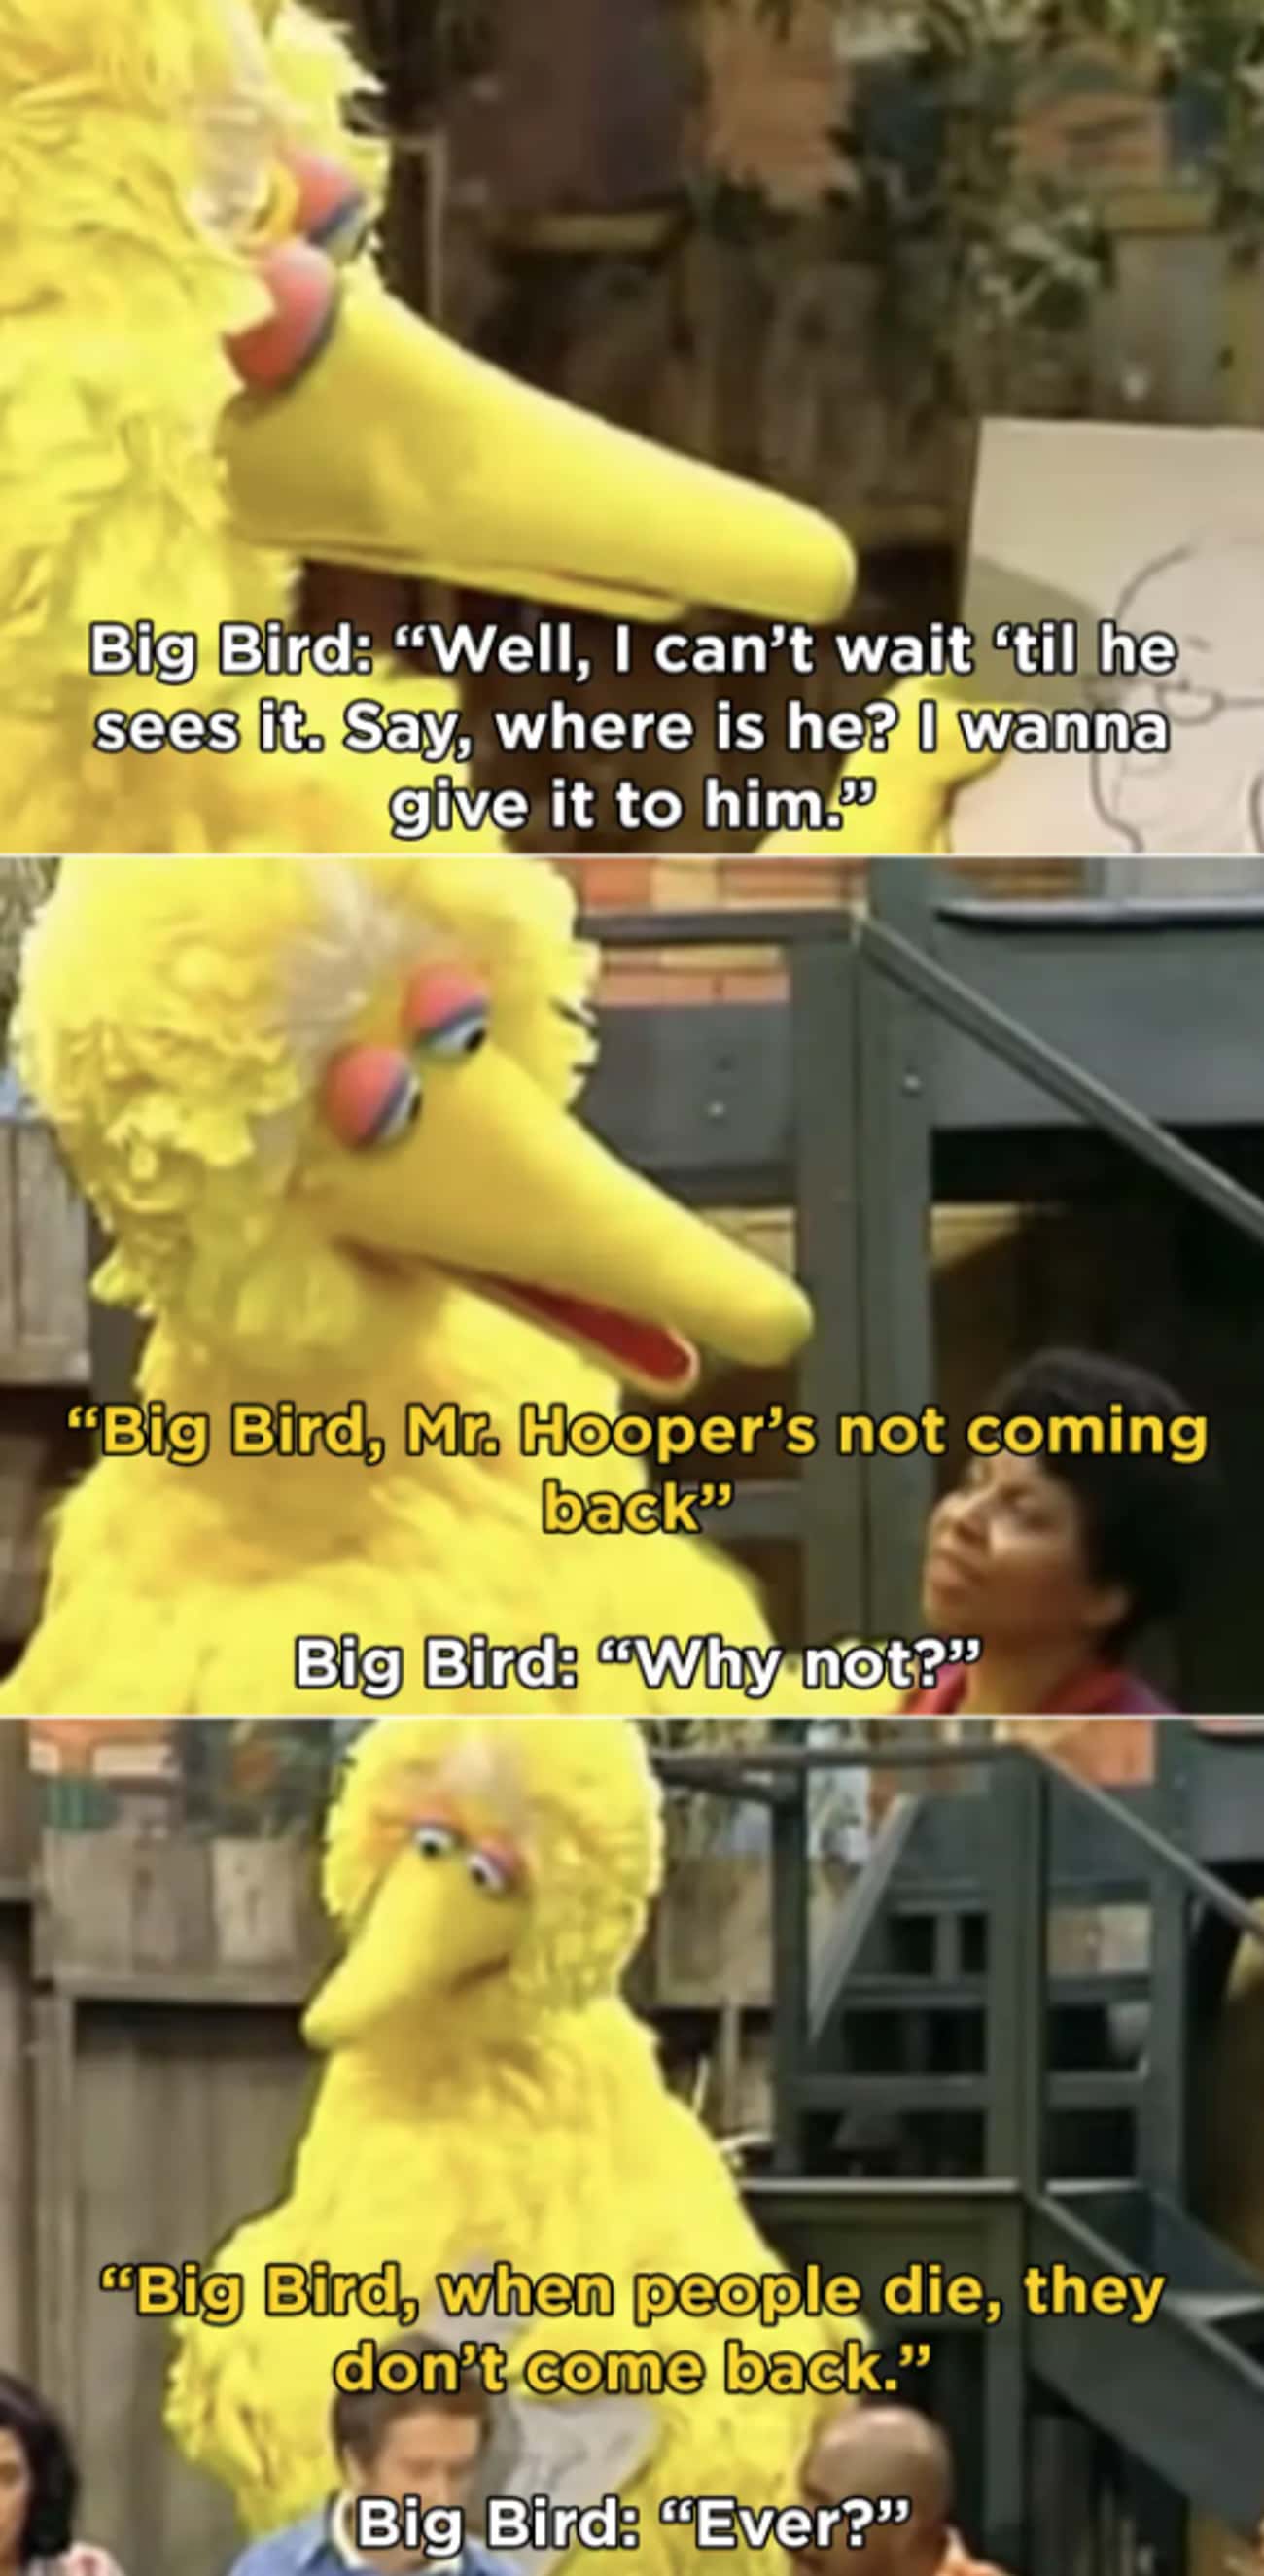 Sesame Street Residents Tell Big Bird About The Passing Of Mr. Hooper